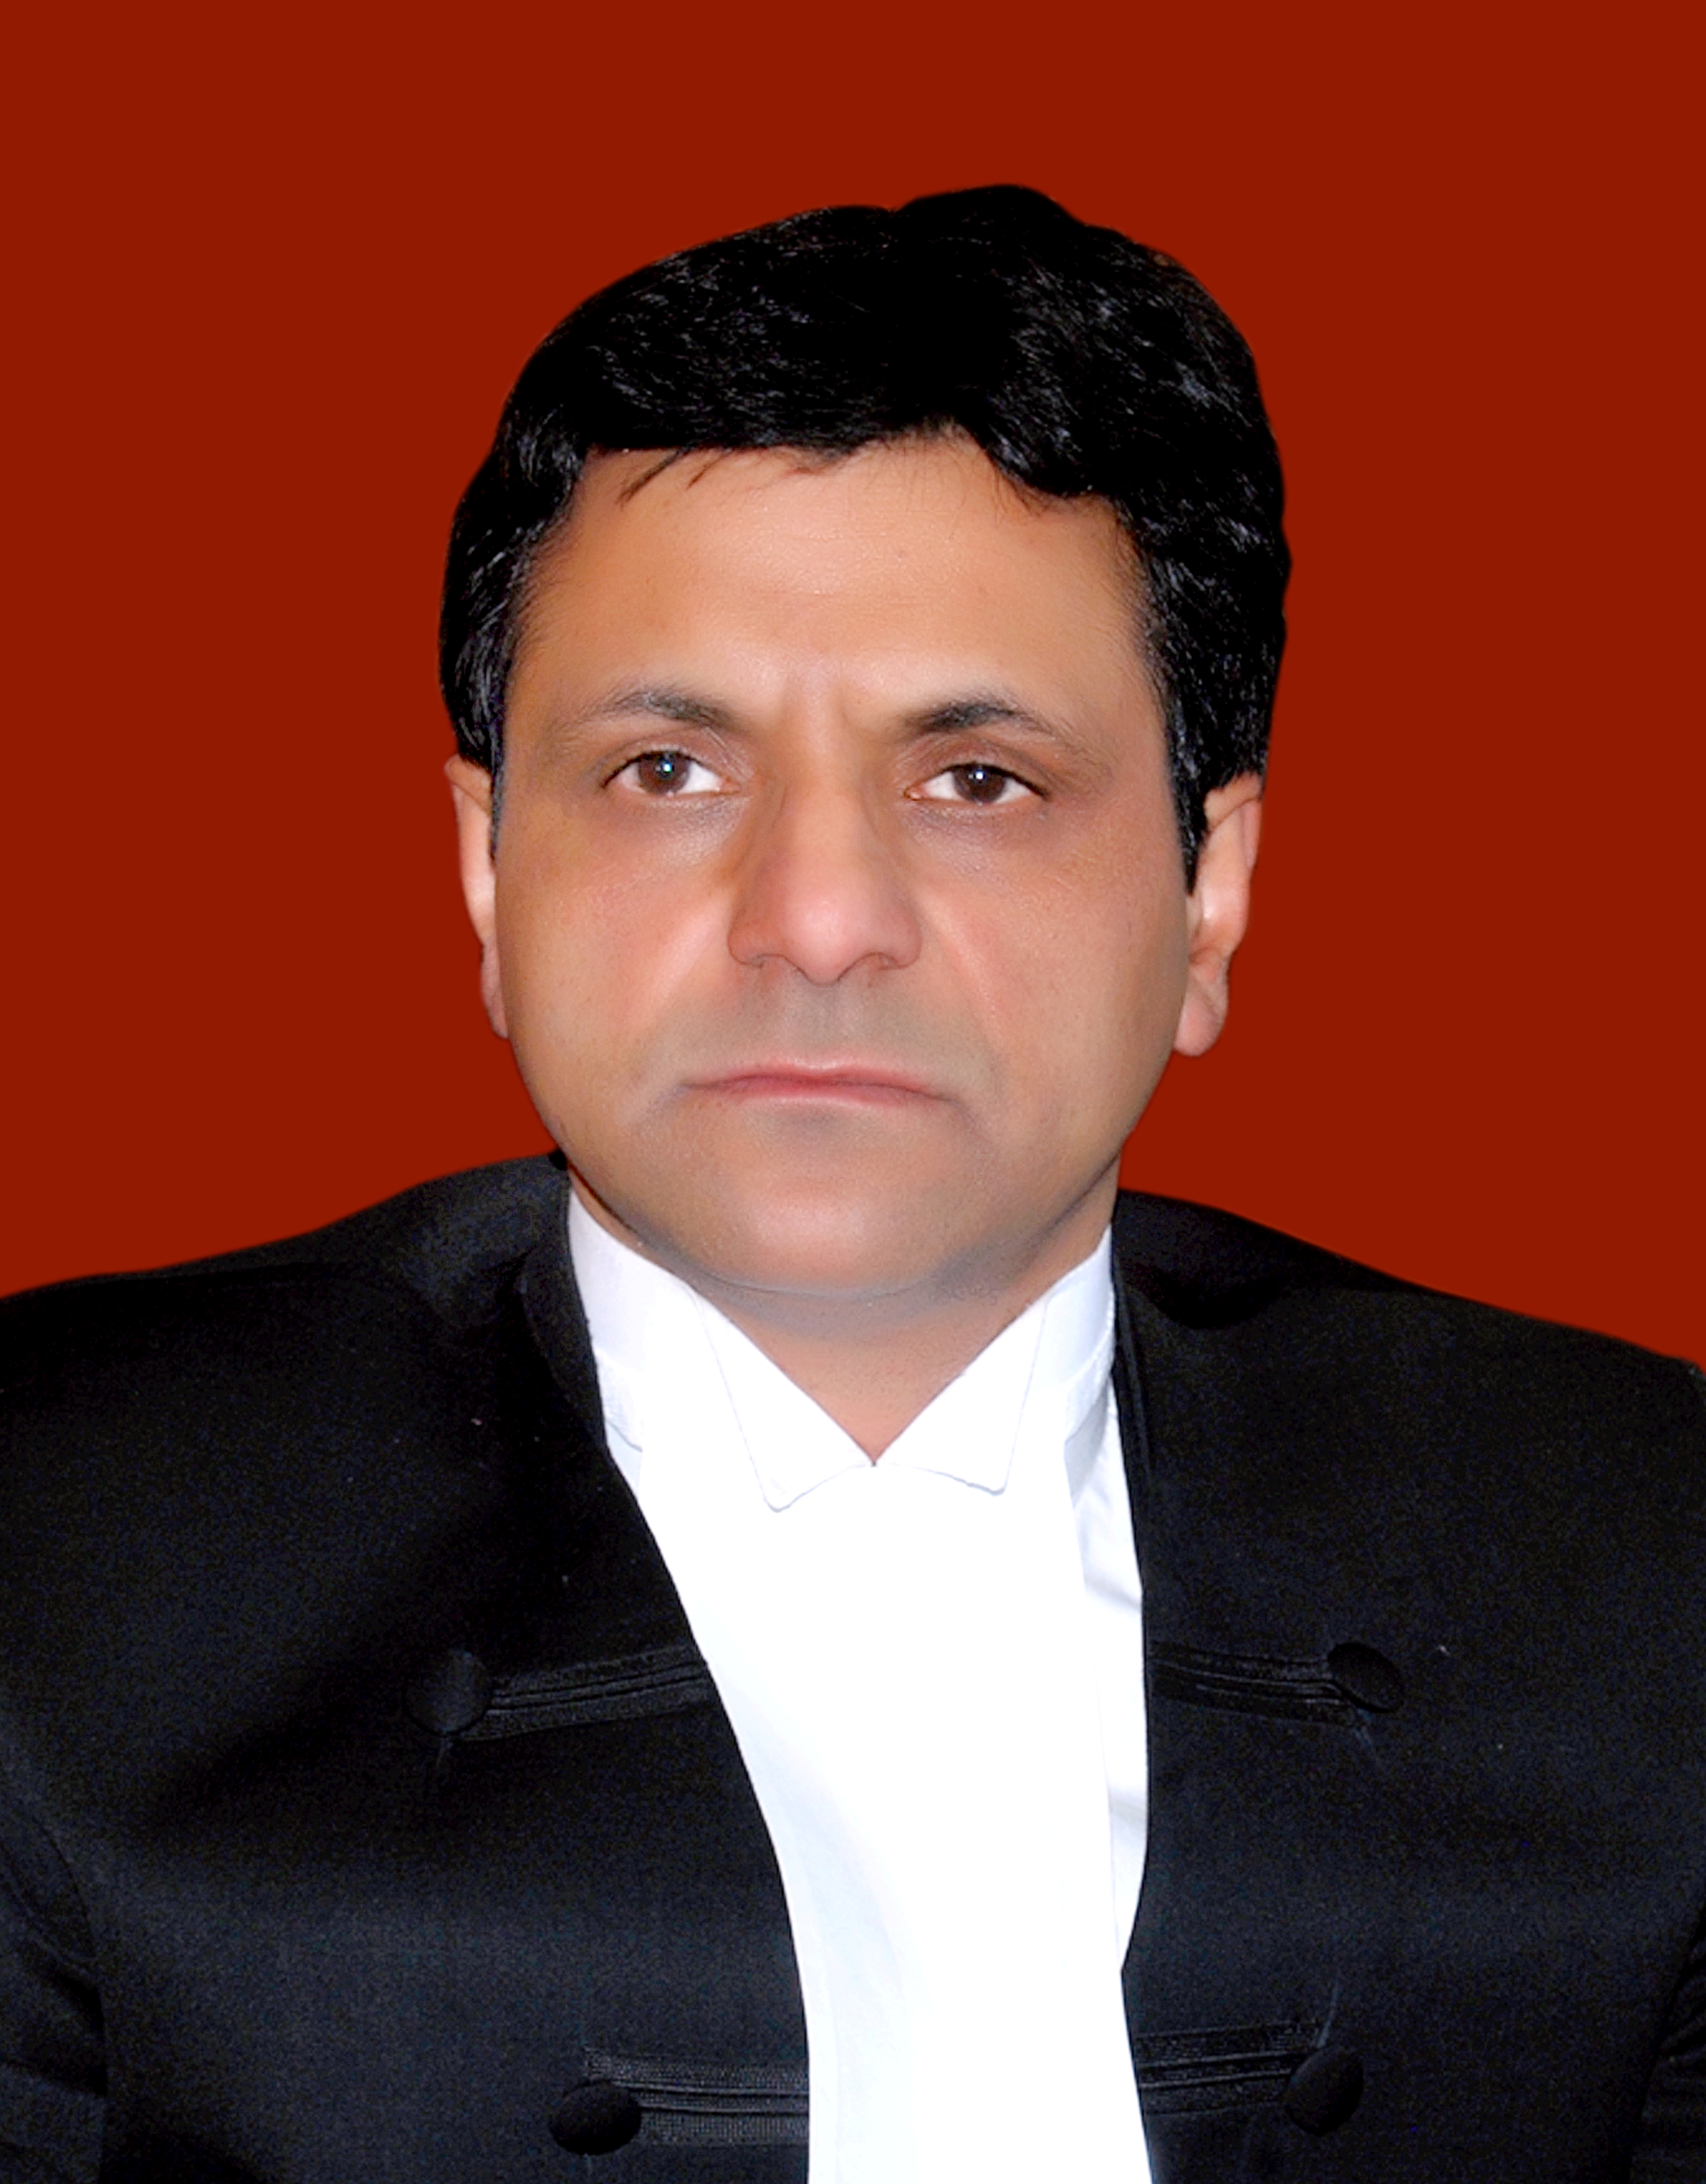 Photograph of Justice Ajay Mohan Goel